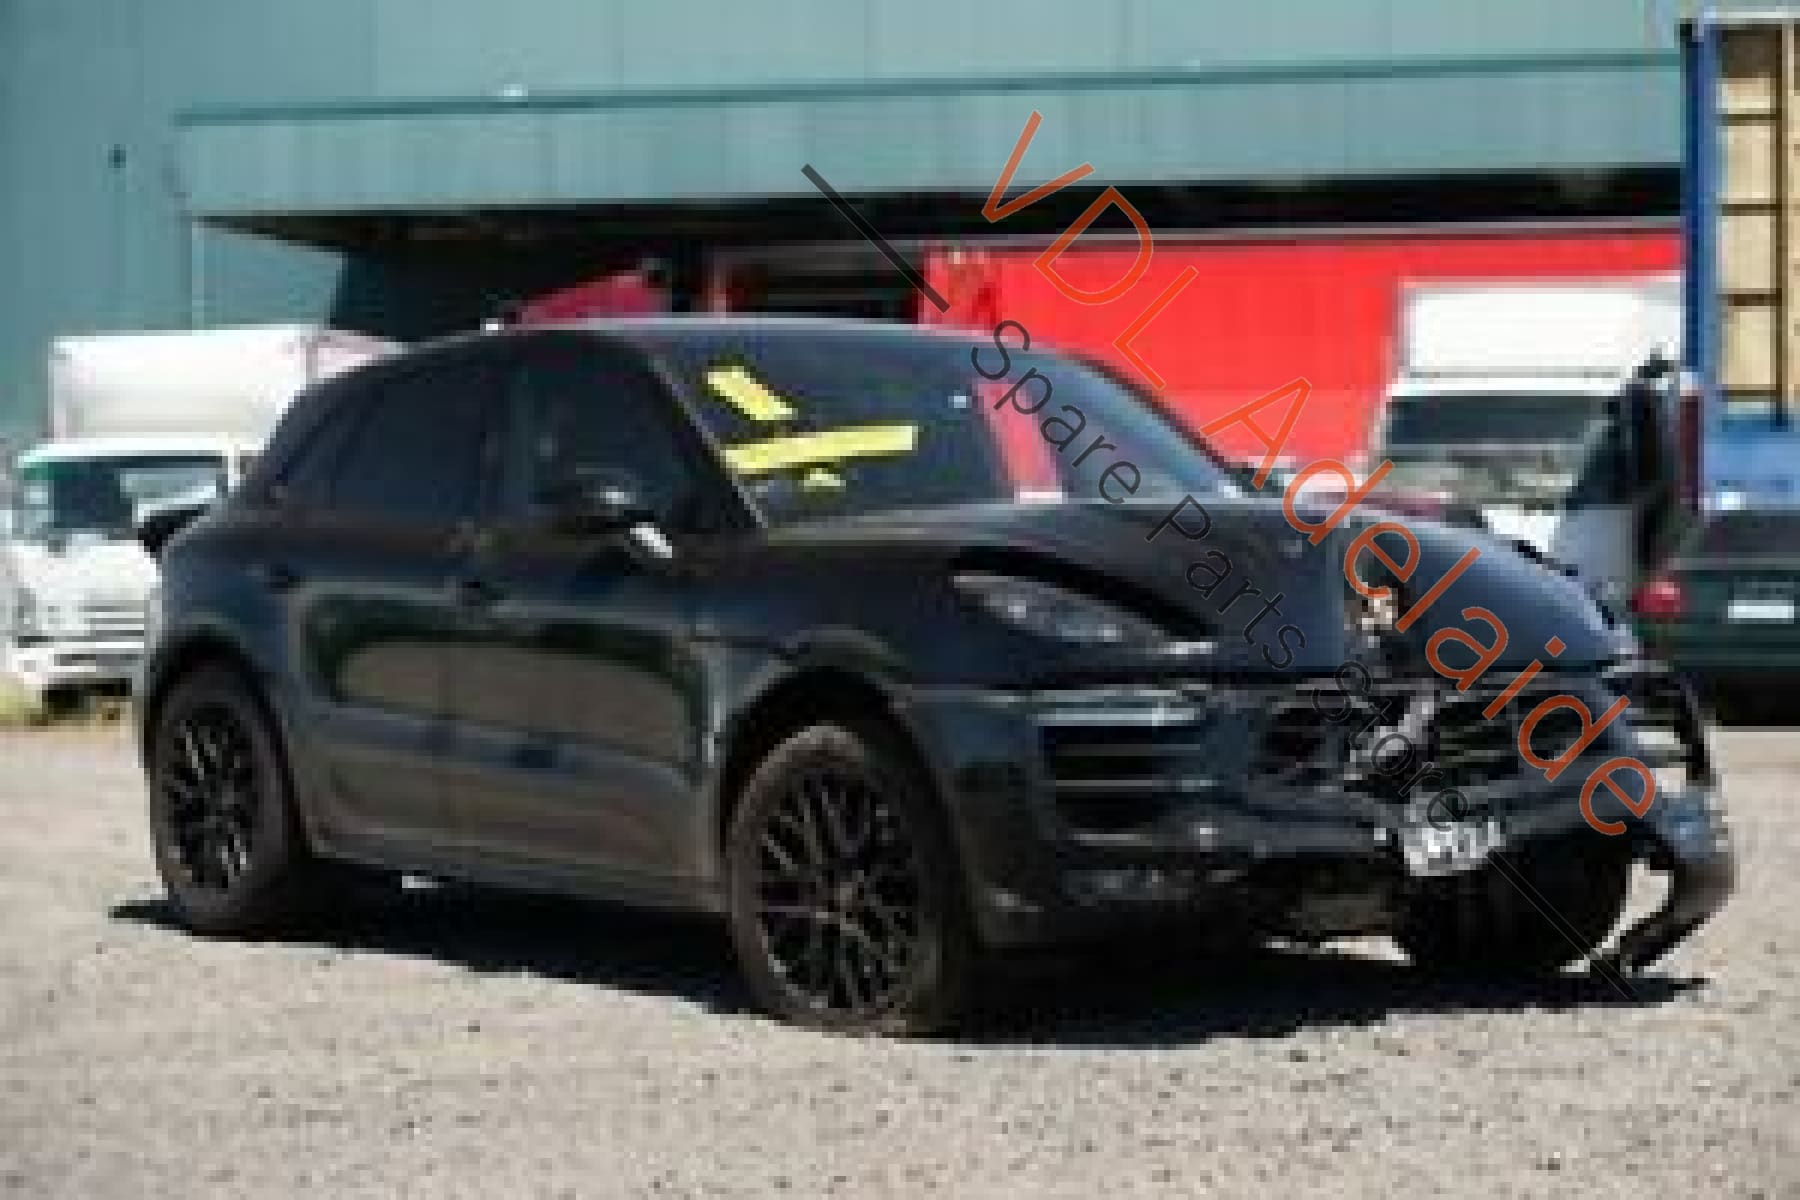 Porsche Macan GTS 95B Complete Panoramic Sunroof with Blind Shade 95B877941A